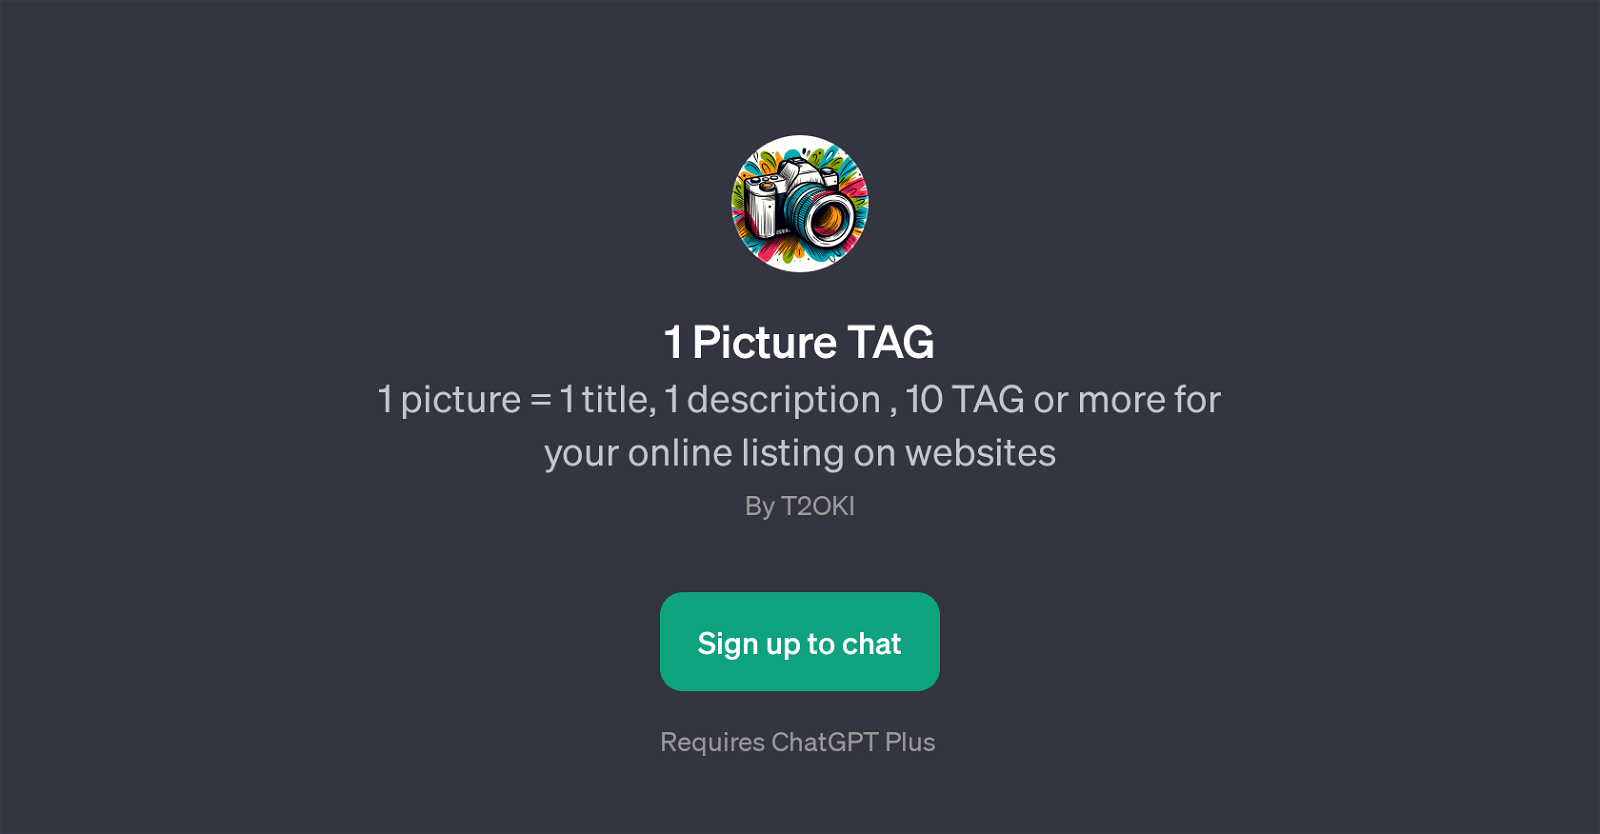 1 Picture TAG website